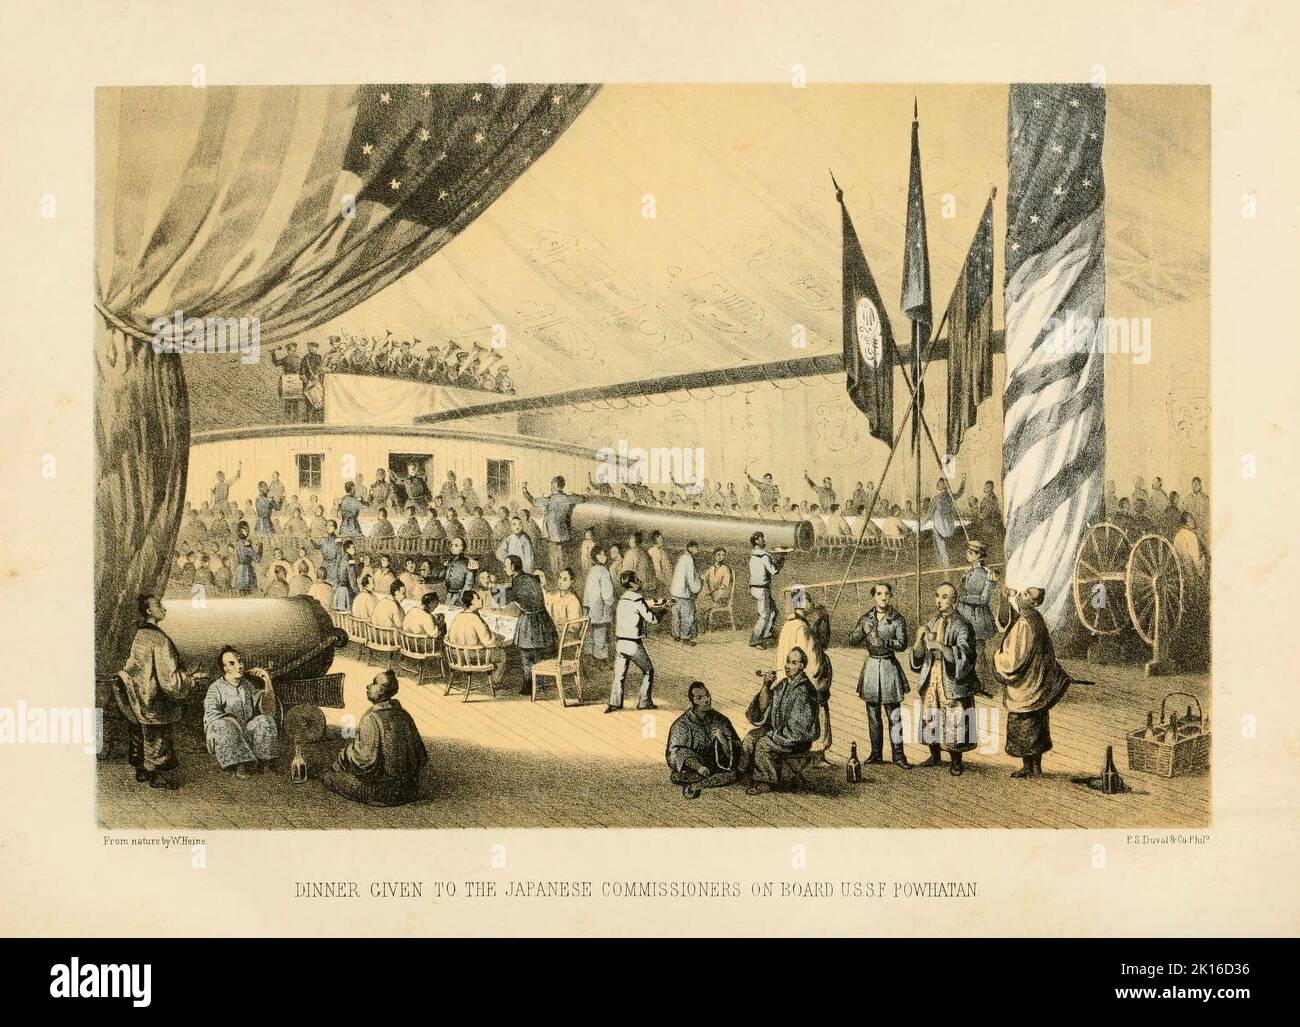 Dinner given to the Japanese comissioners on board U.S.S.F. Powhatan. From Narrative of the Expedition of an American Squadron to the China Seas and Japan, performed in the years 1852, 1853, and 1854, under the Command of Commodore M.C. Perry, United States Navy, by order of the Government of the United States. By Matthew Calbraith Perry (1794-1858), Lambert Lilly (1798-1866), George Jones (1800-1870). Publication date 1856. Stock Photo